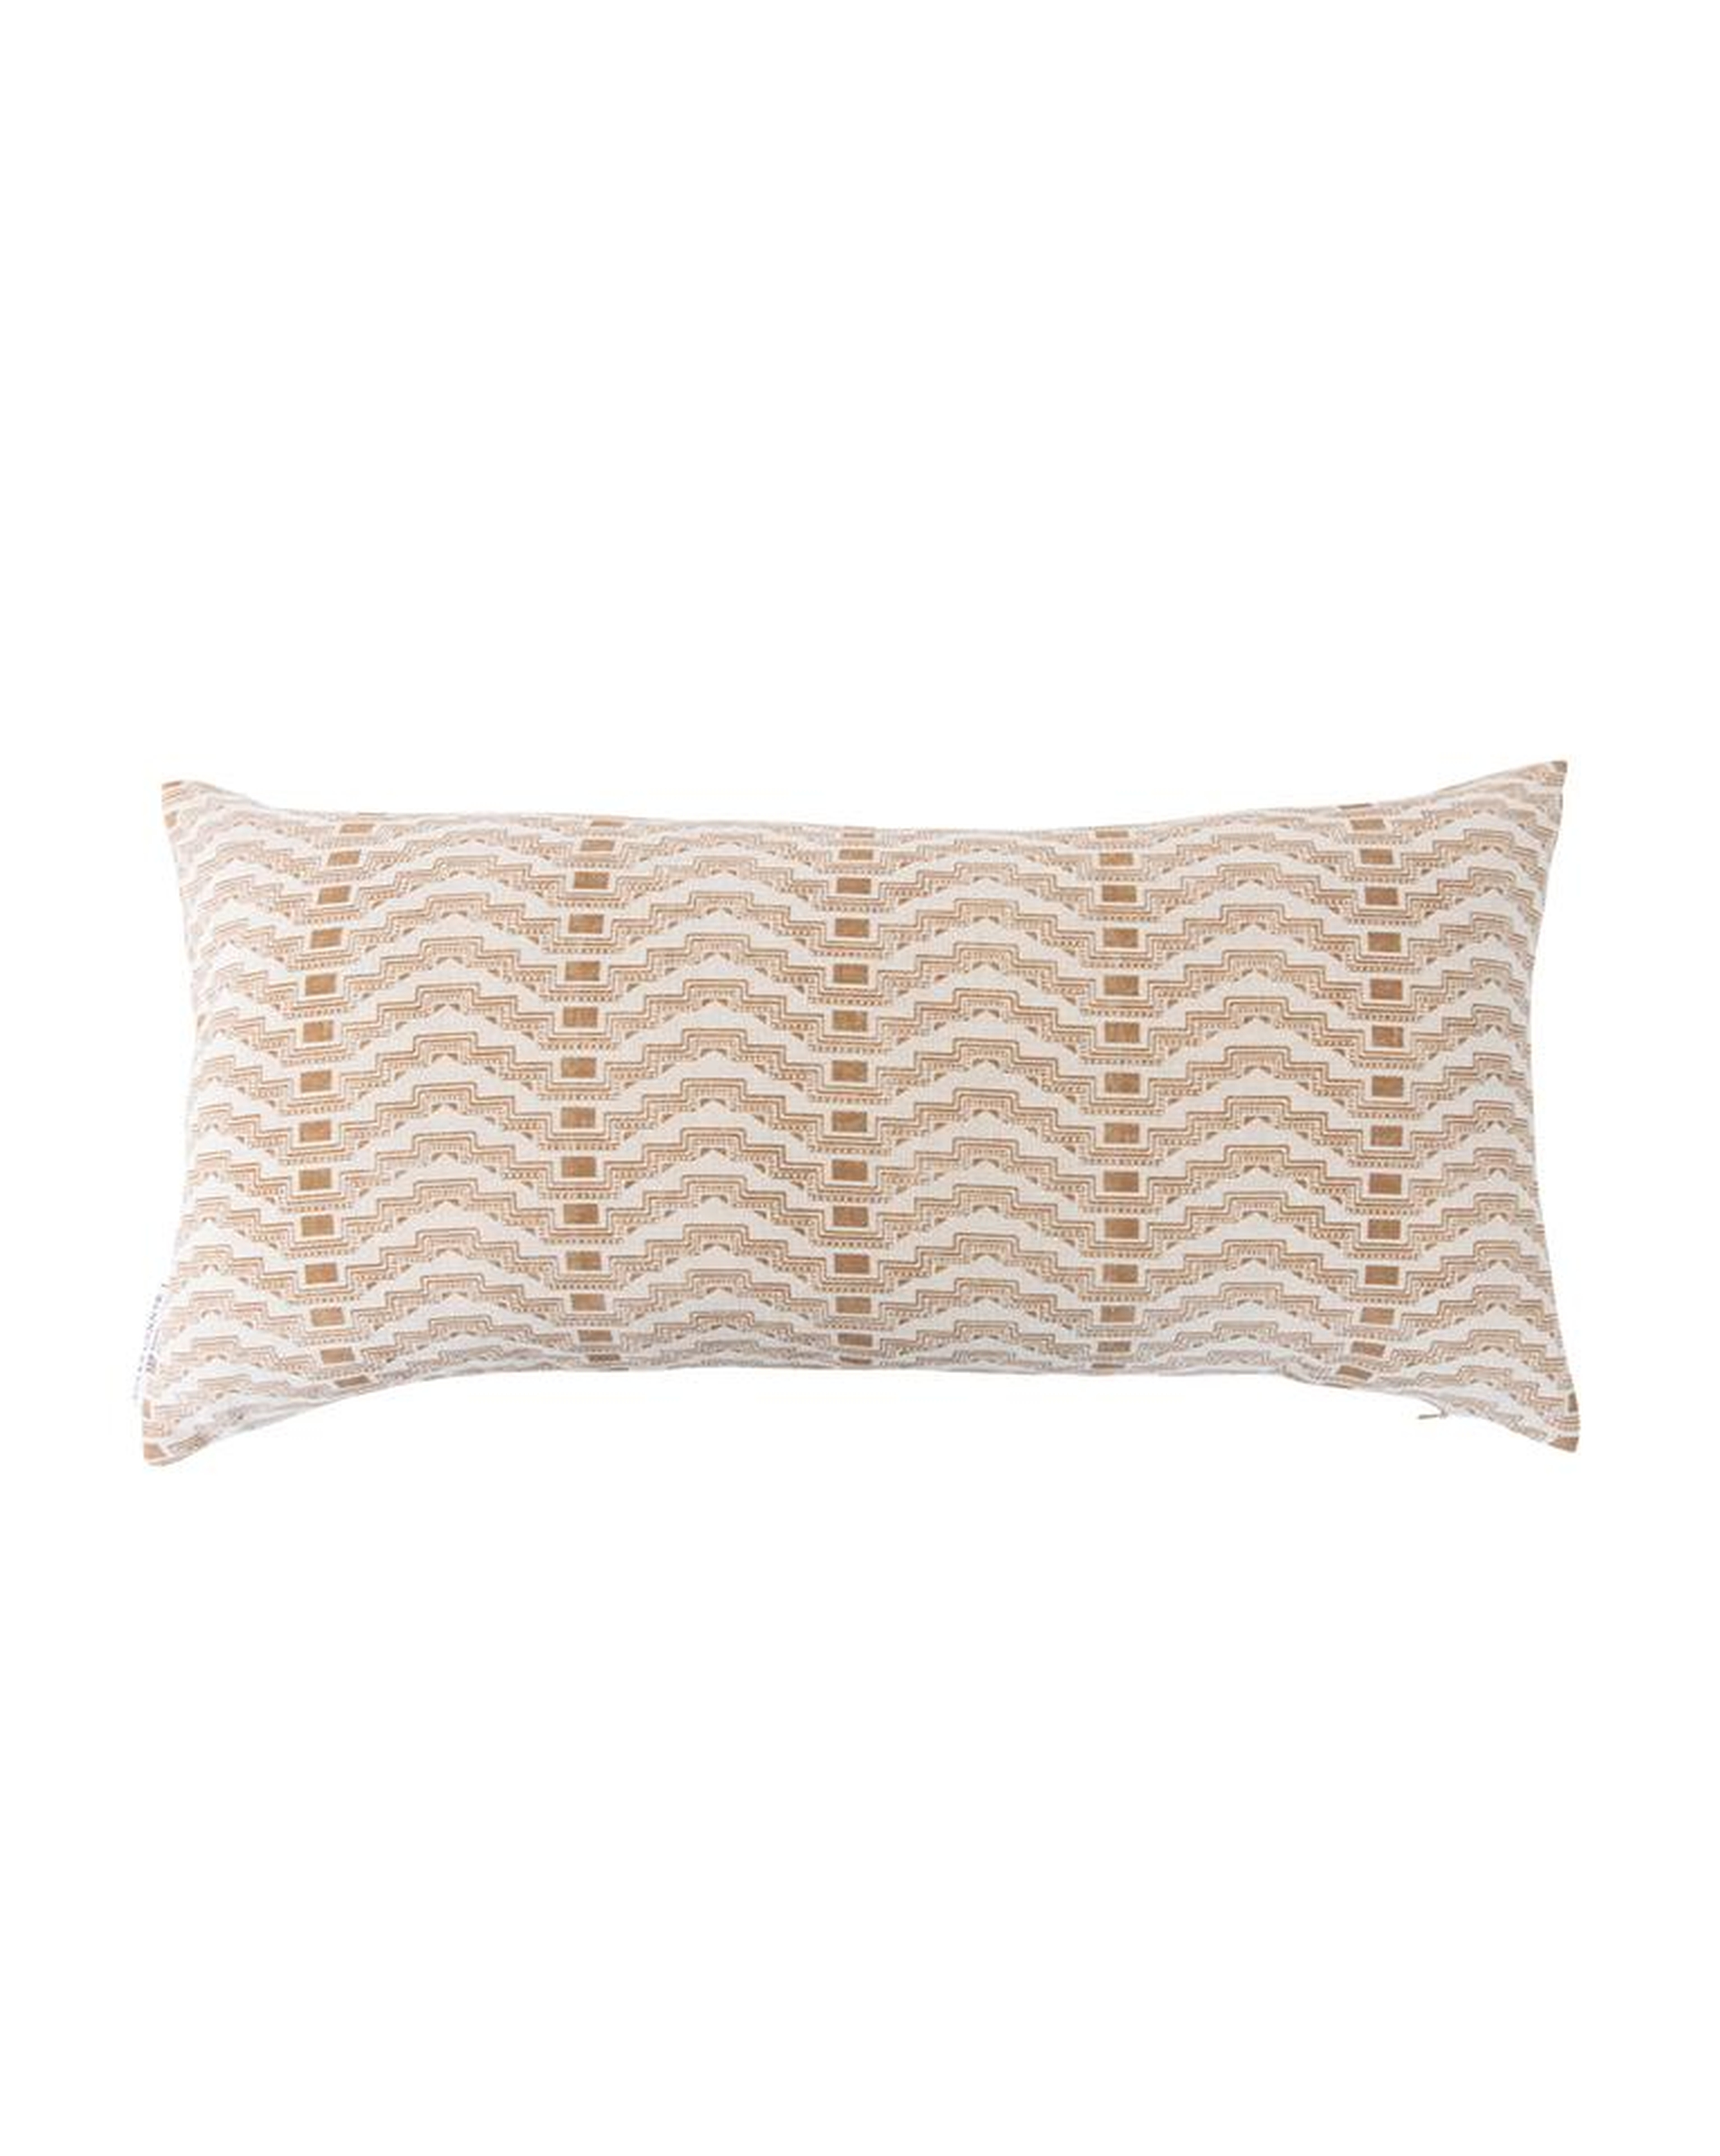 Hejira Pillow Cover, Ivory & Camel, 24" x 12" - McGee & Co.